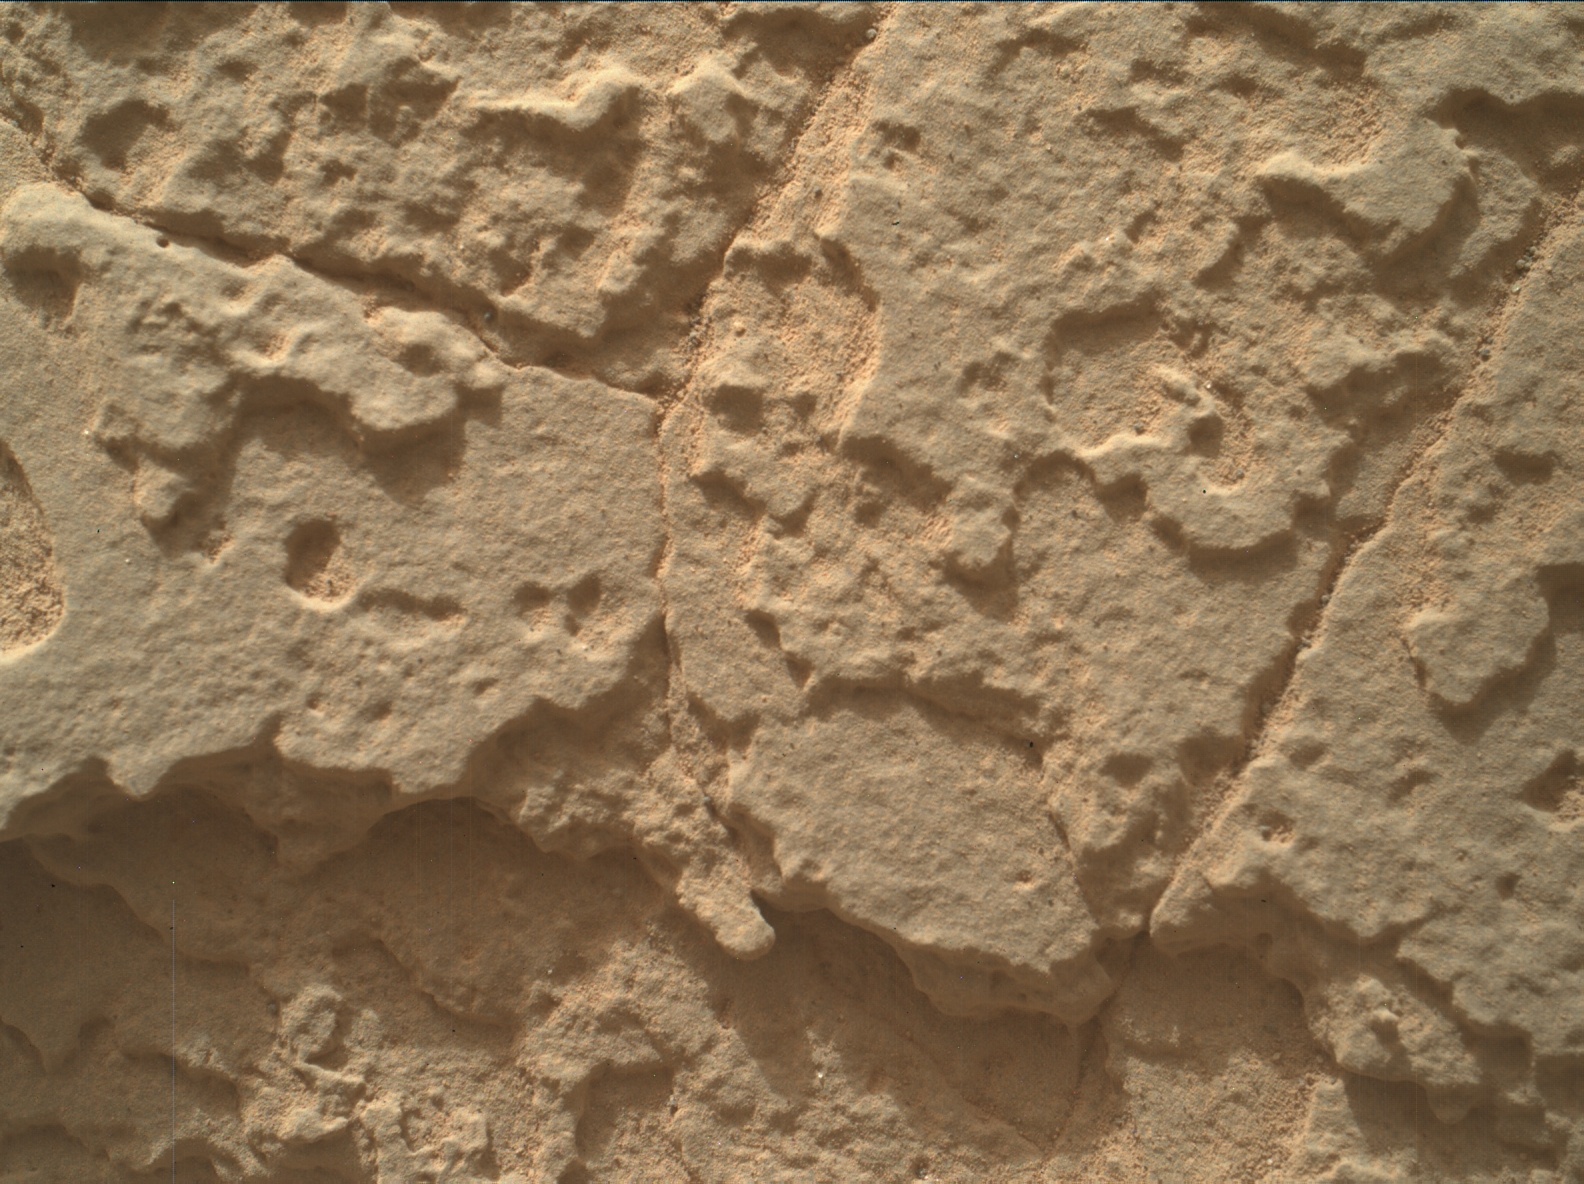 Nasa's Mars rover Curiosity acquired this image using its Mars Hand Lens Imager (MAHLI) on Sol 3392